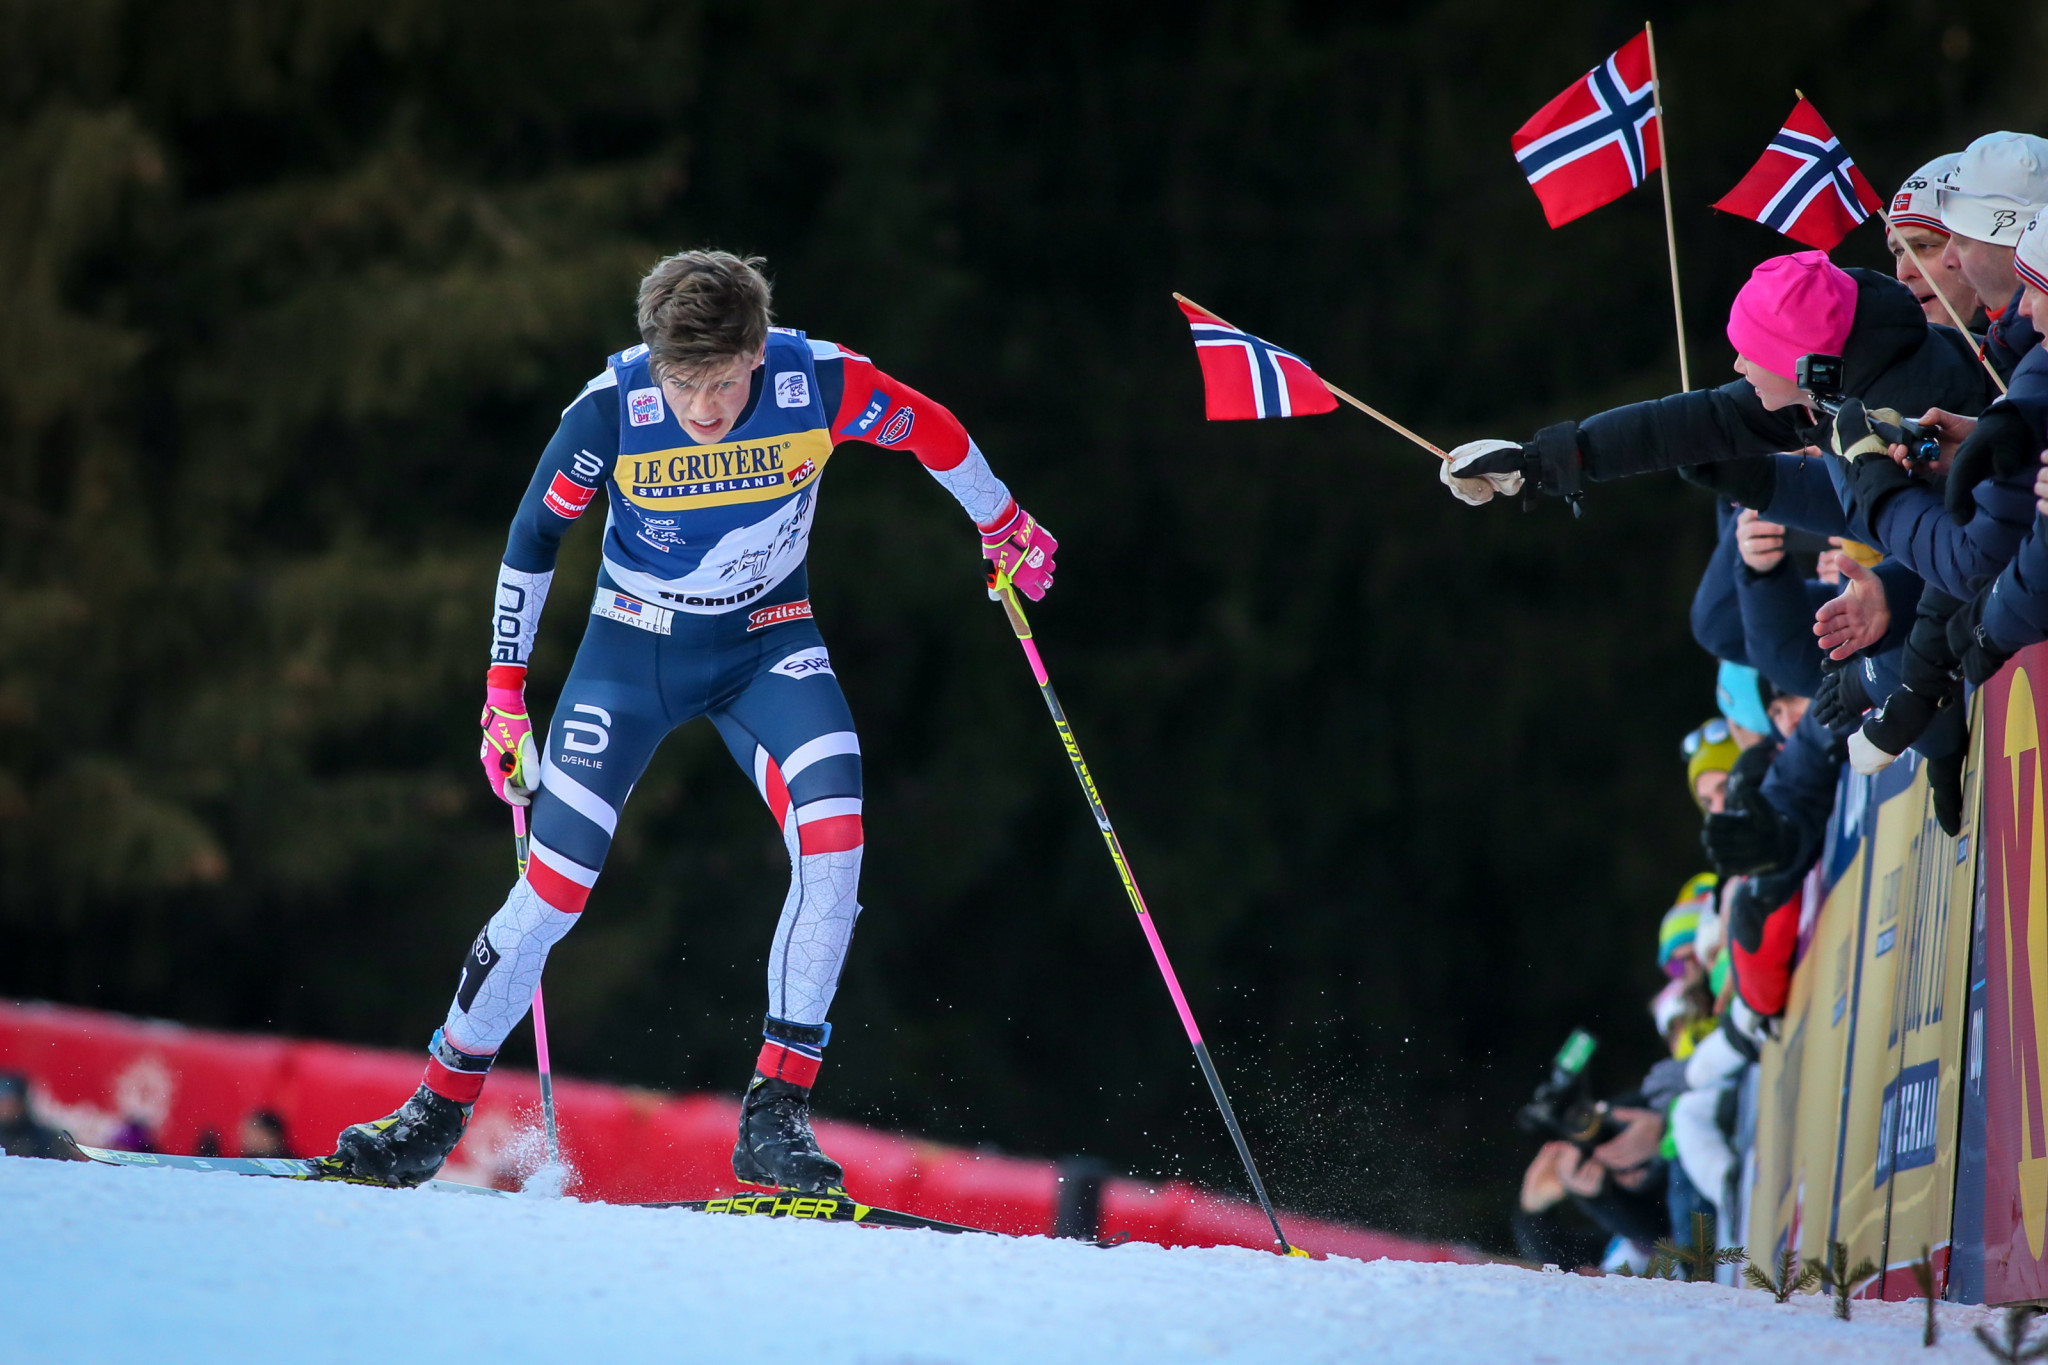 Norway secured a classic sprint double as Johannes Høsflot Klæbo and Maiken Caspersen Falla won the men's and women's races respectively ©Getty Images